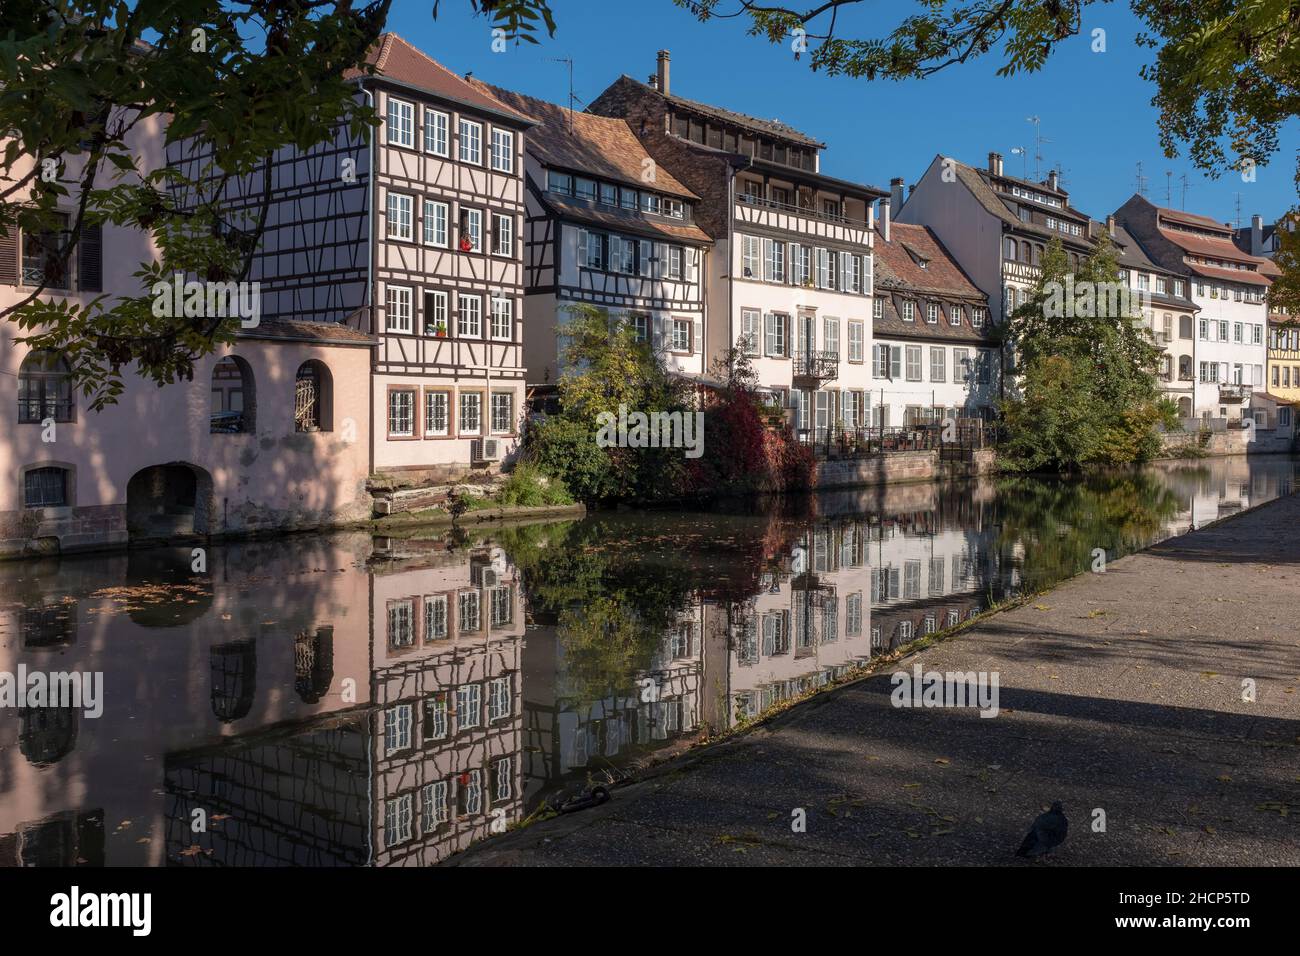 Half-timbered houses of the Petite France district in Strasbourg France reflecting on the Ill River, taken on a sunny autumn afternoon with no people Stock Photo